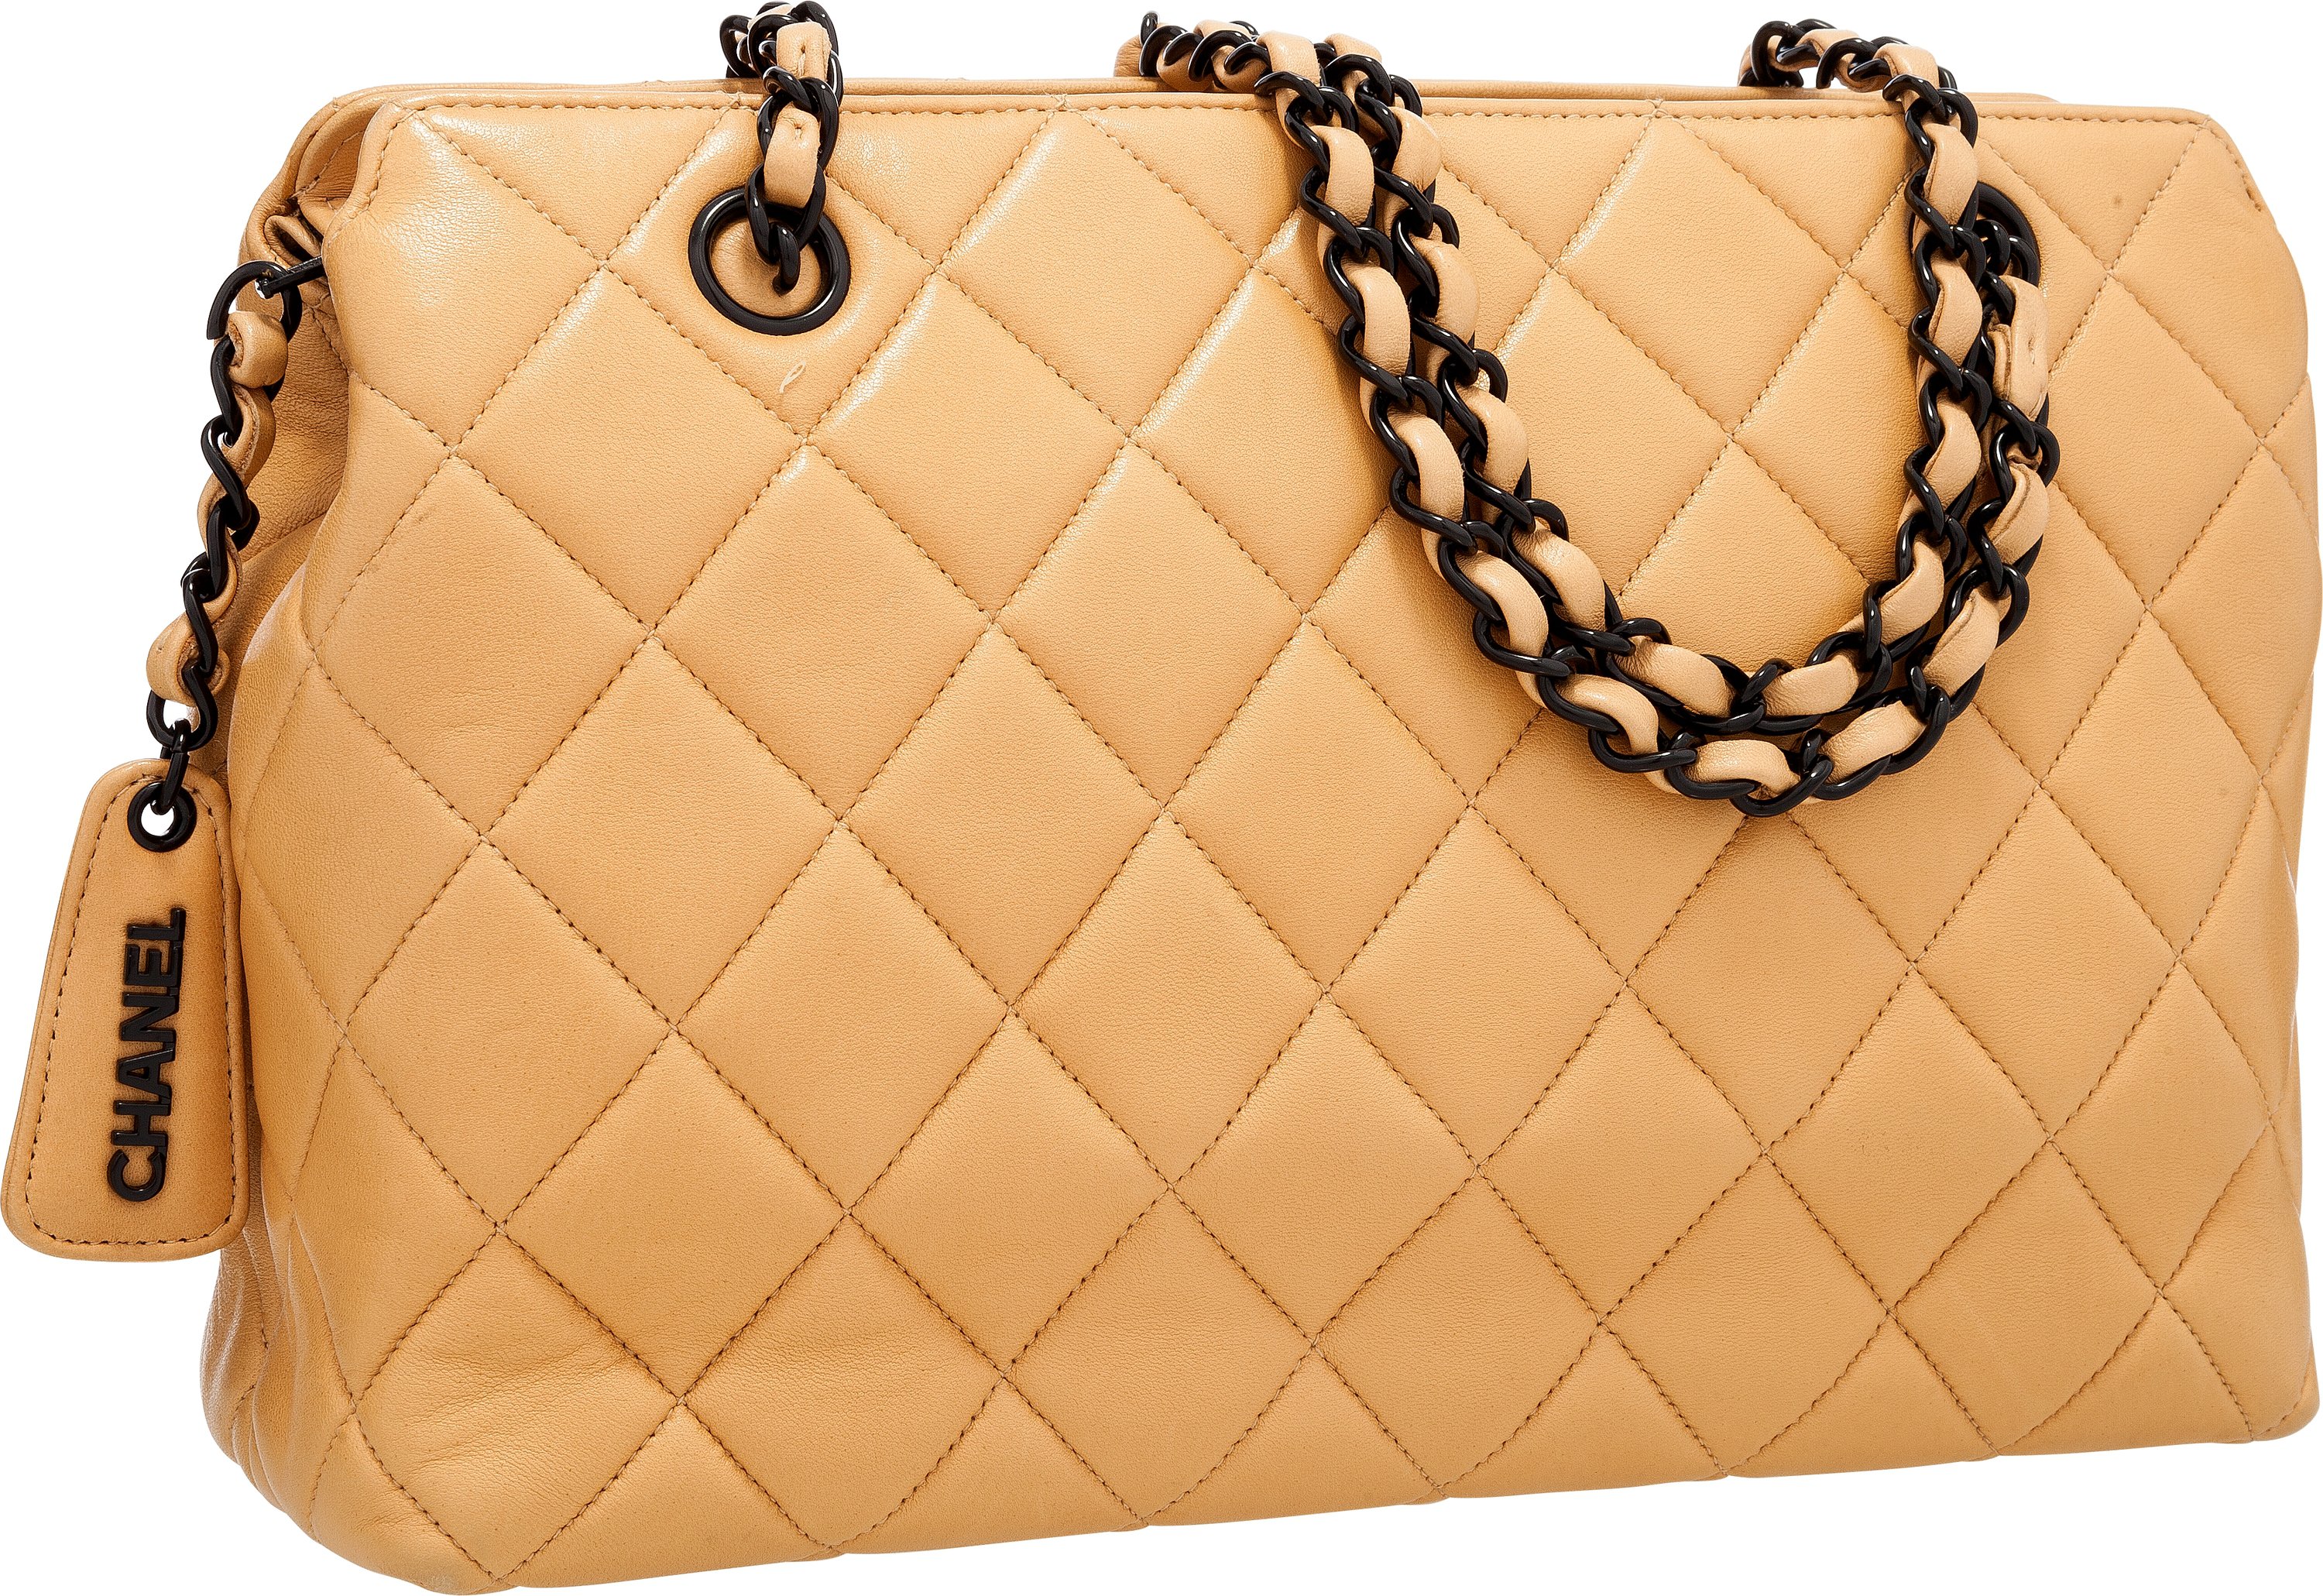 Chanel Beige Quilted Lambskin Leather Shoulder Bag with Black, Lot #19020